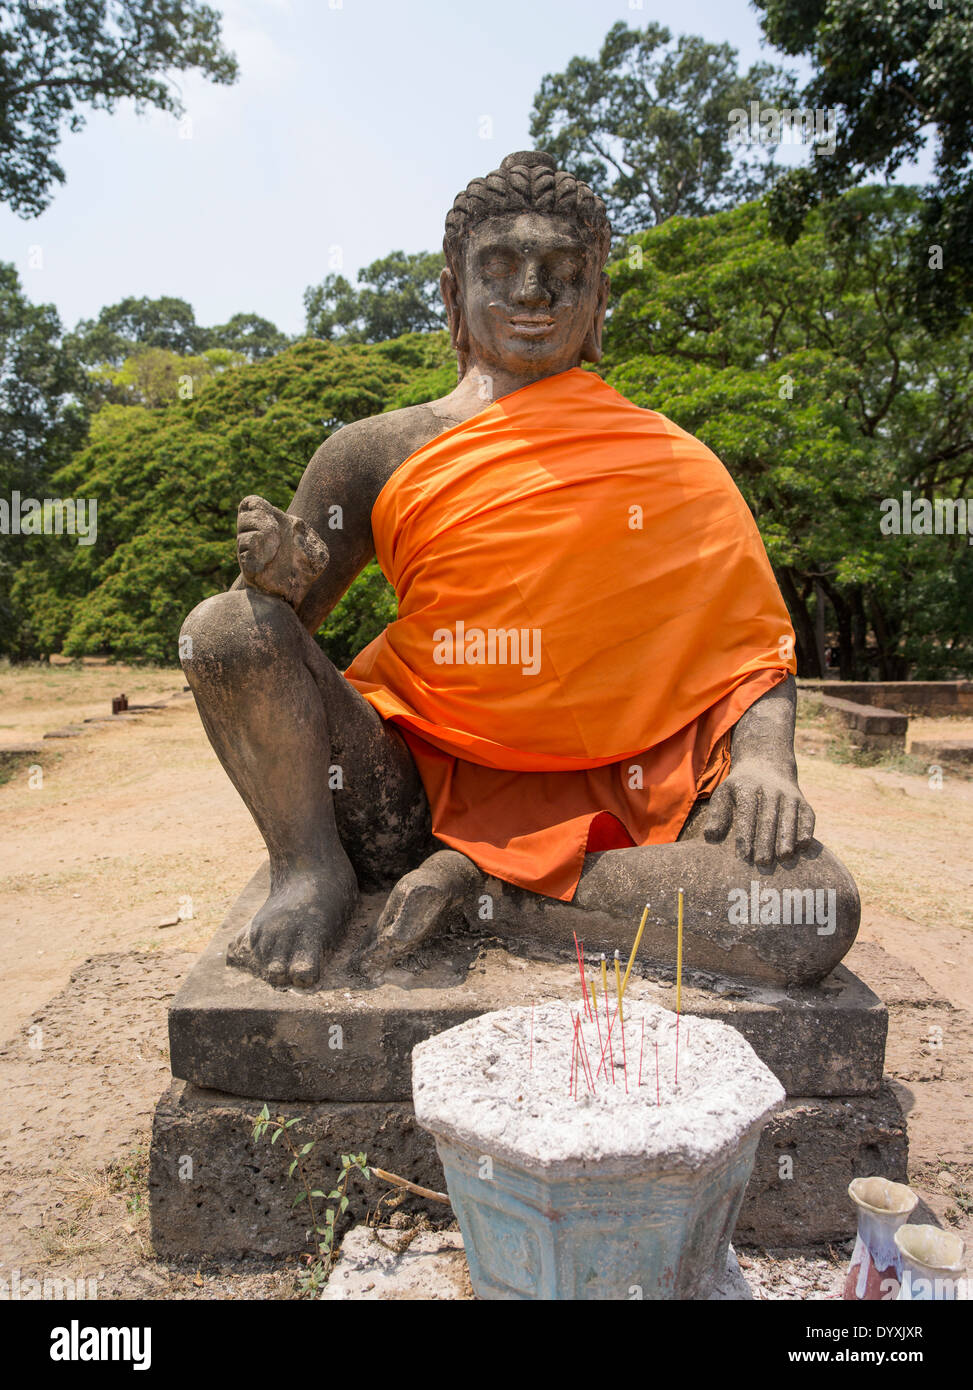 Statue of Buddha by Terrace of the Leper King within Angkor Thom, Siem Reap, Cambodia Stock Photo